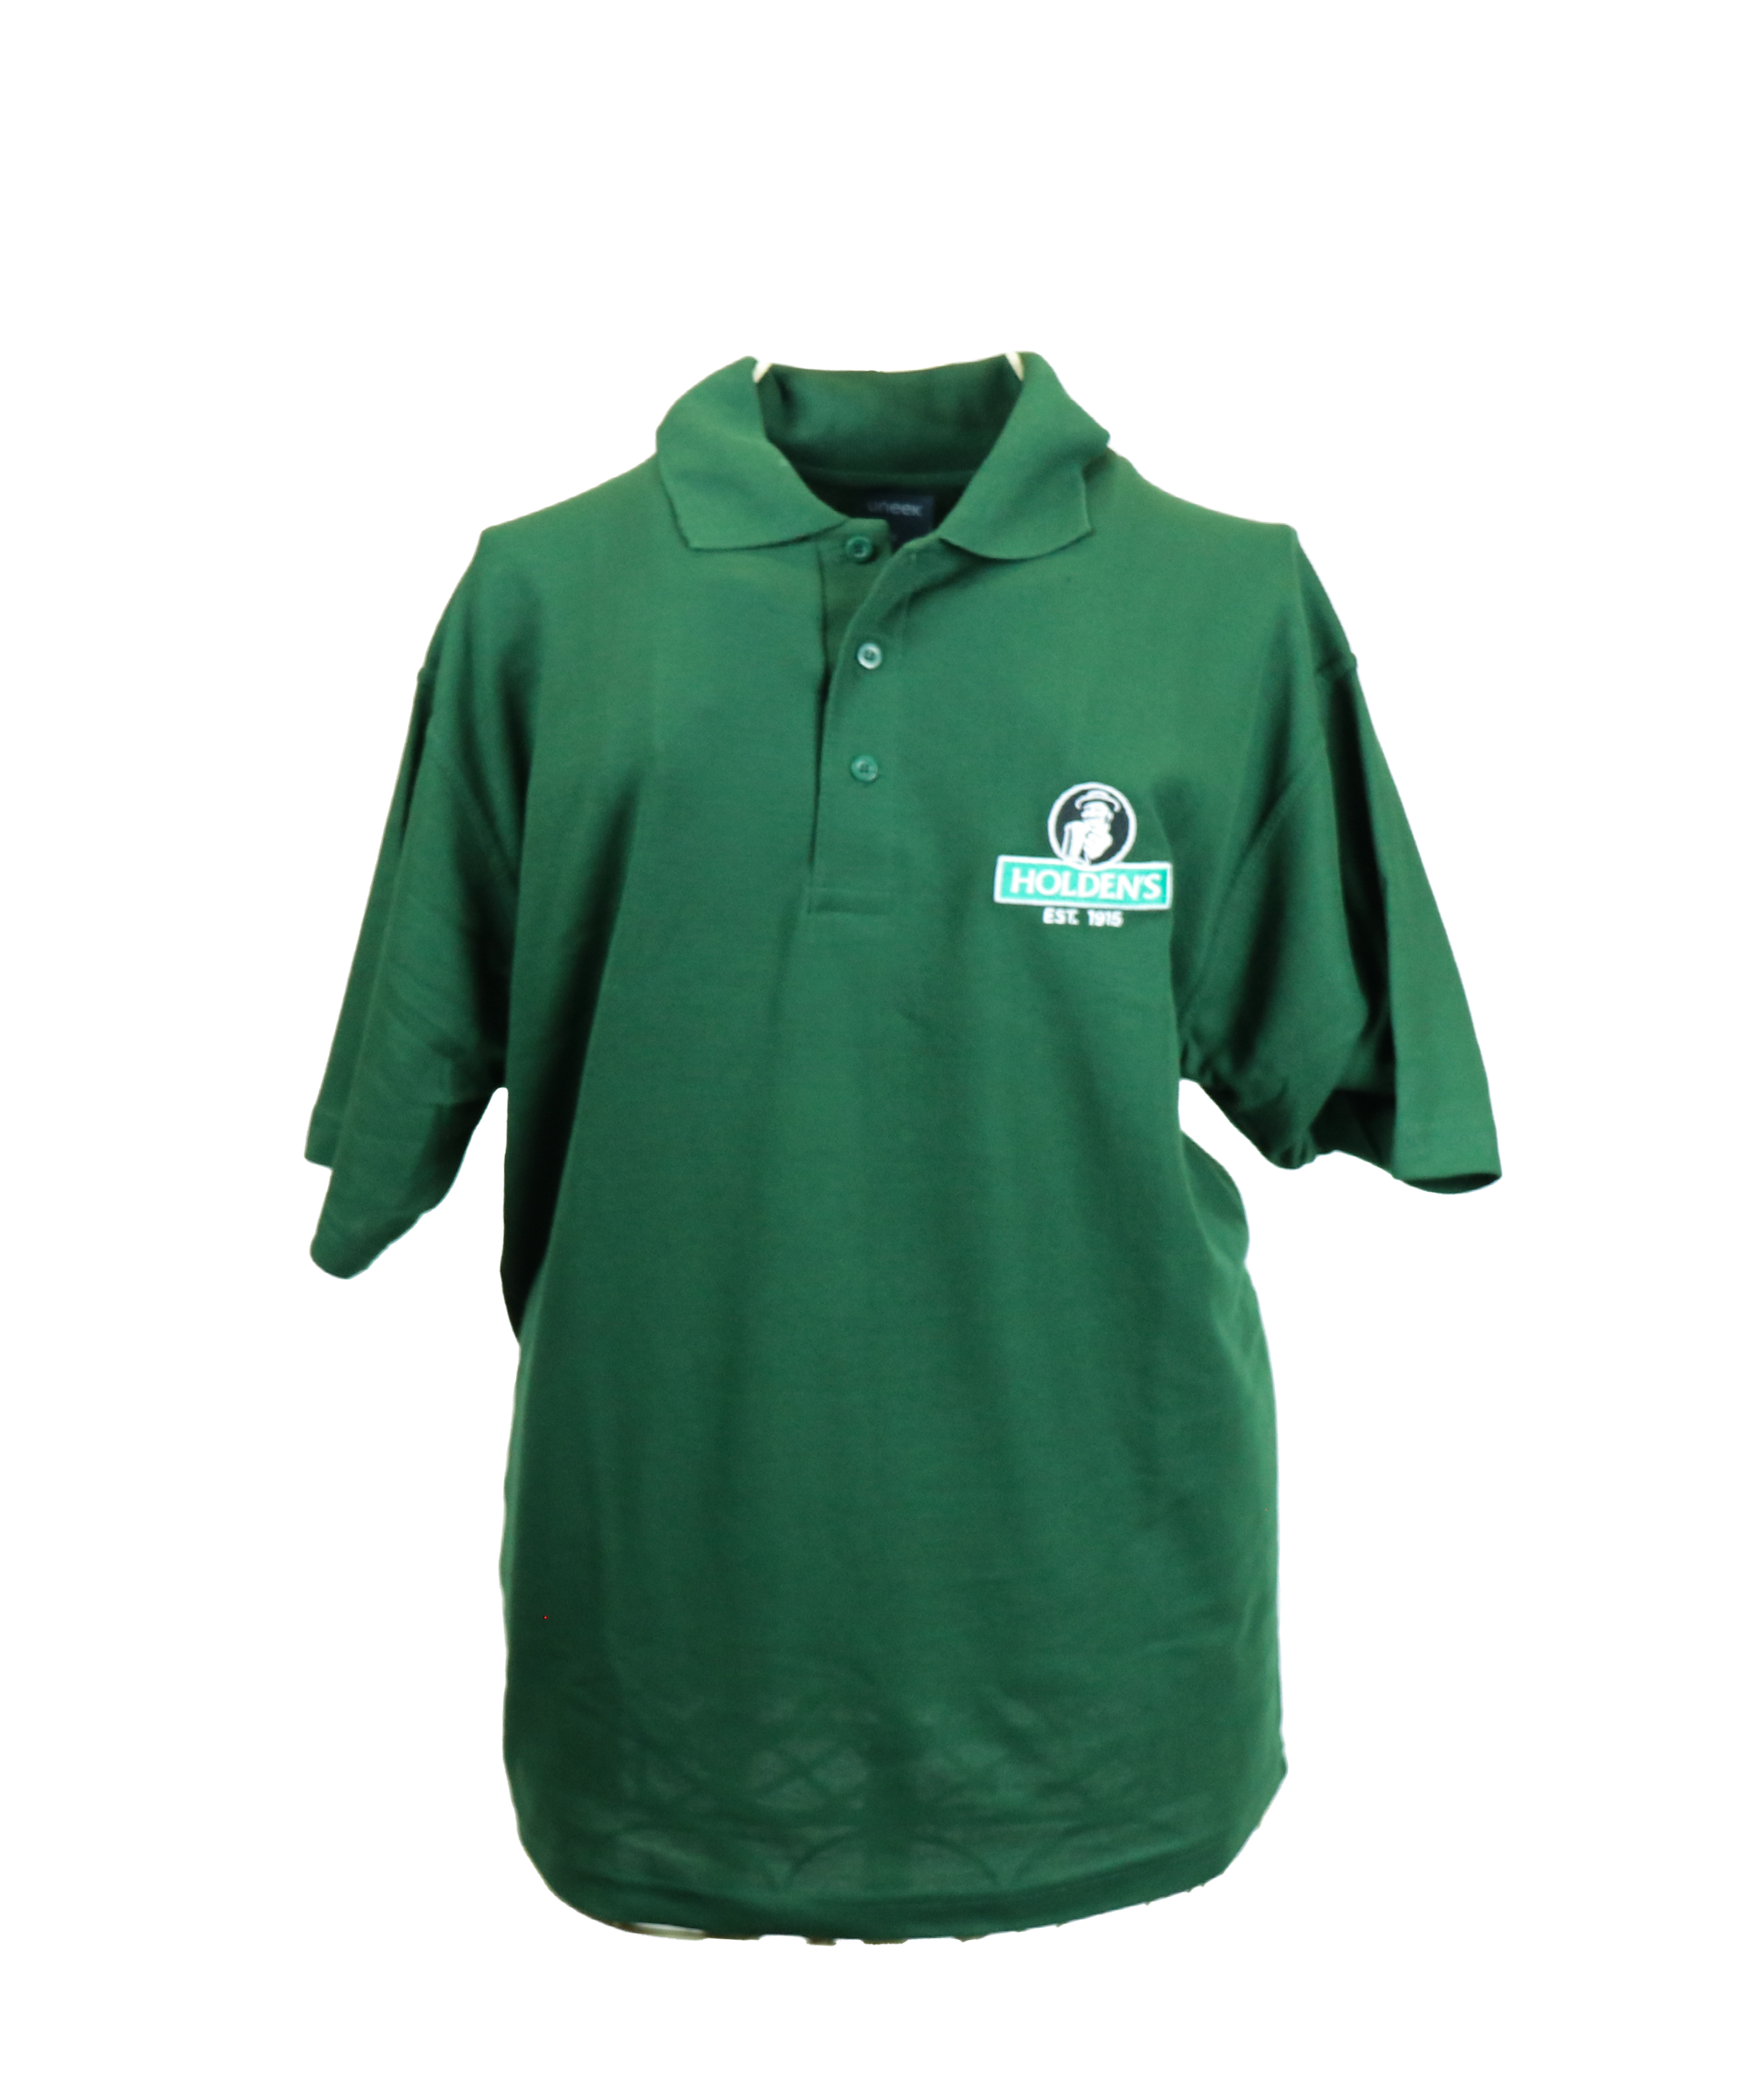 green Holdens polo